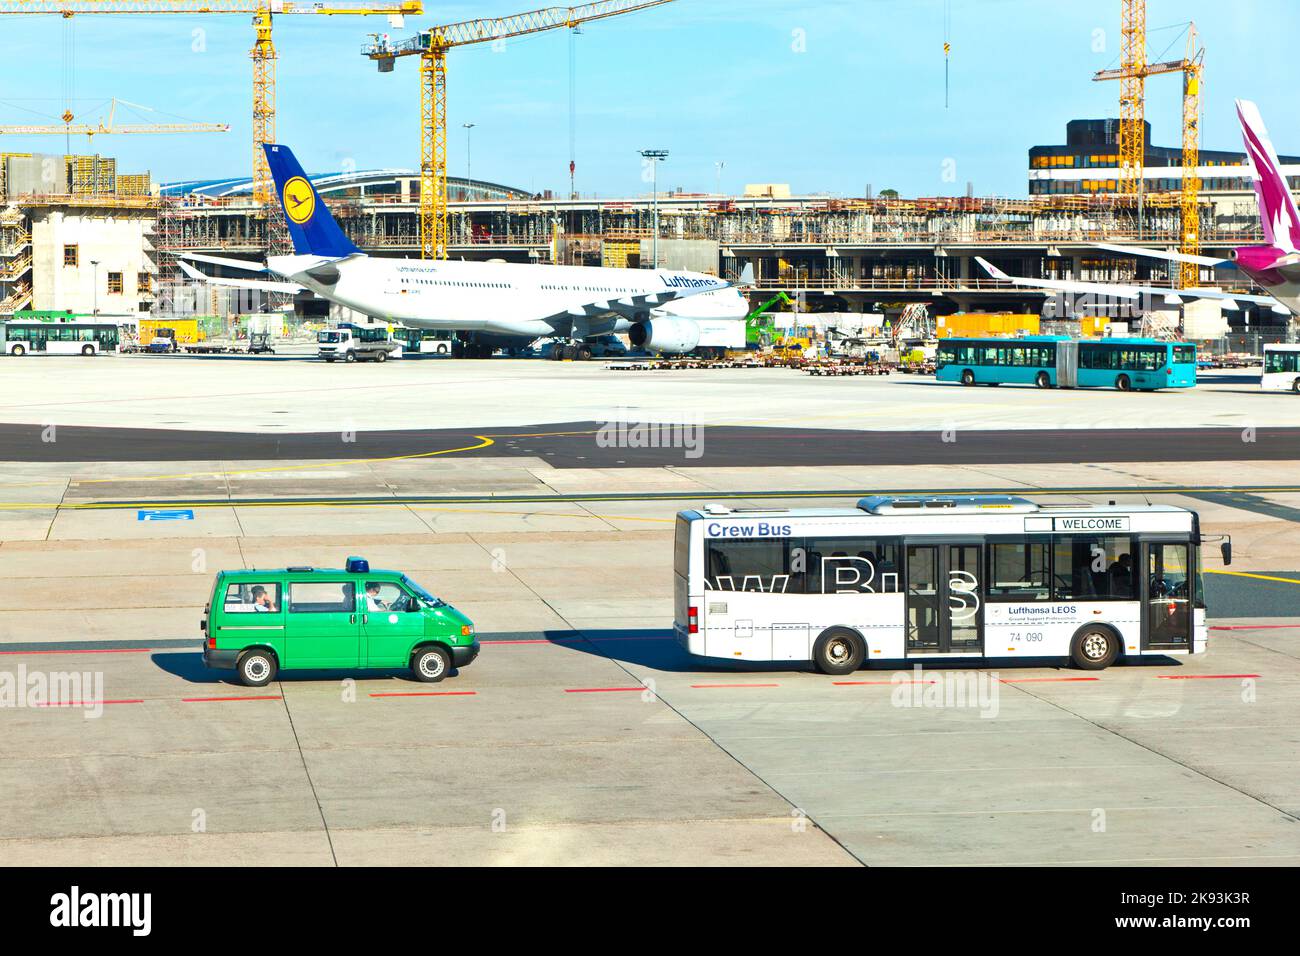 FRANKFURT, GERMANY - AUG 25: Crewbus and customs police ready to reveive the incoming Flight at Terminal A on August, 25, 2011 in Frankfurt, Germany. Stock Photo